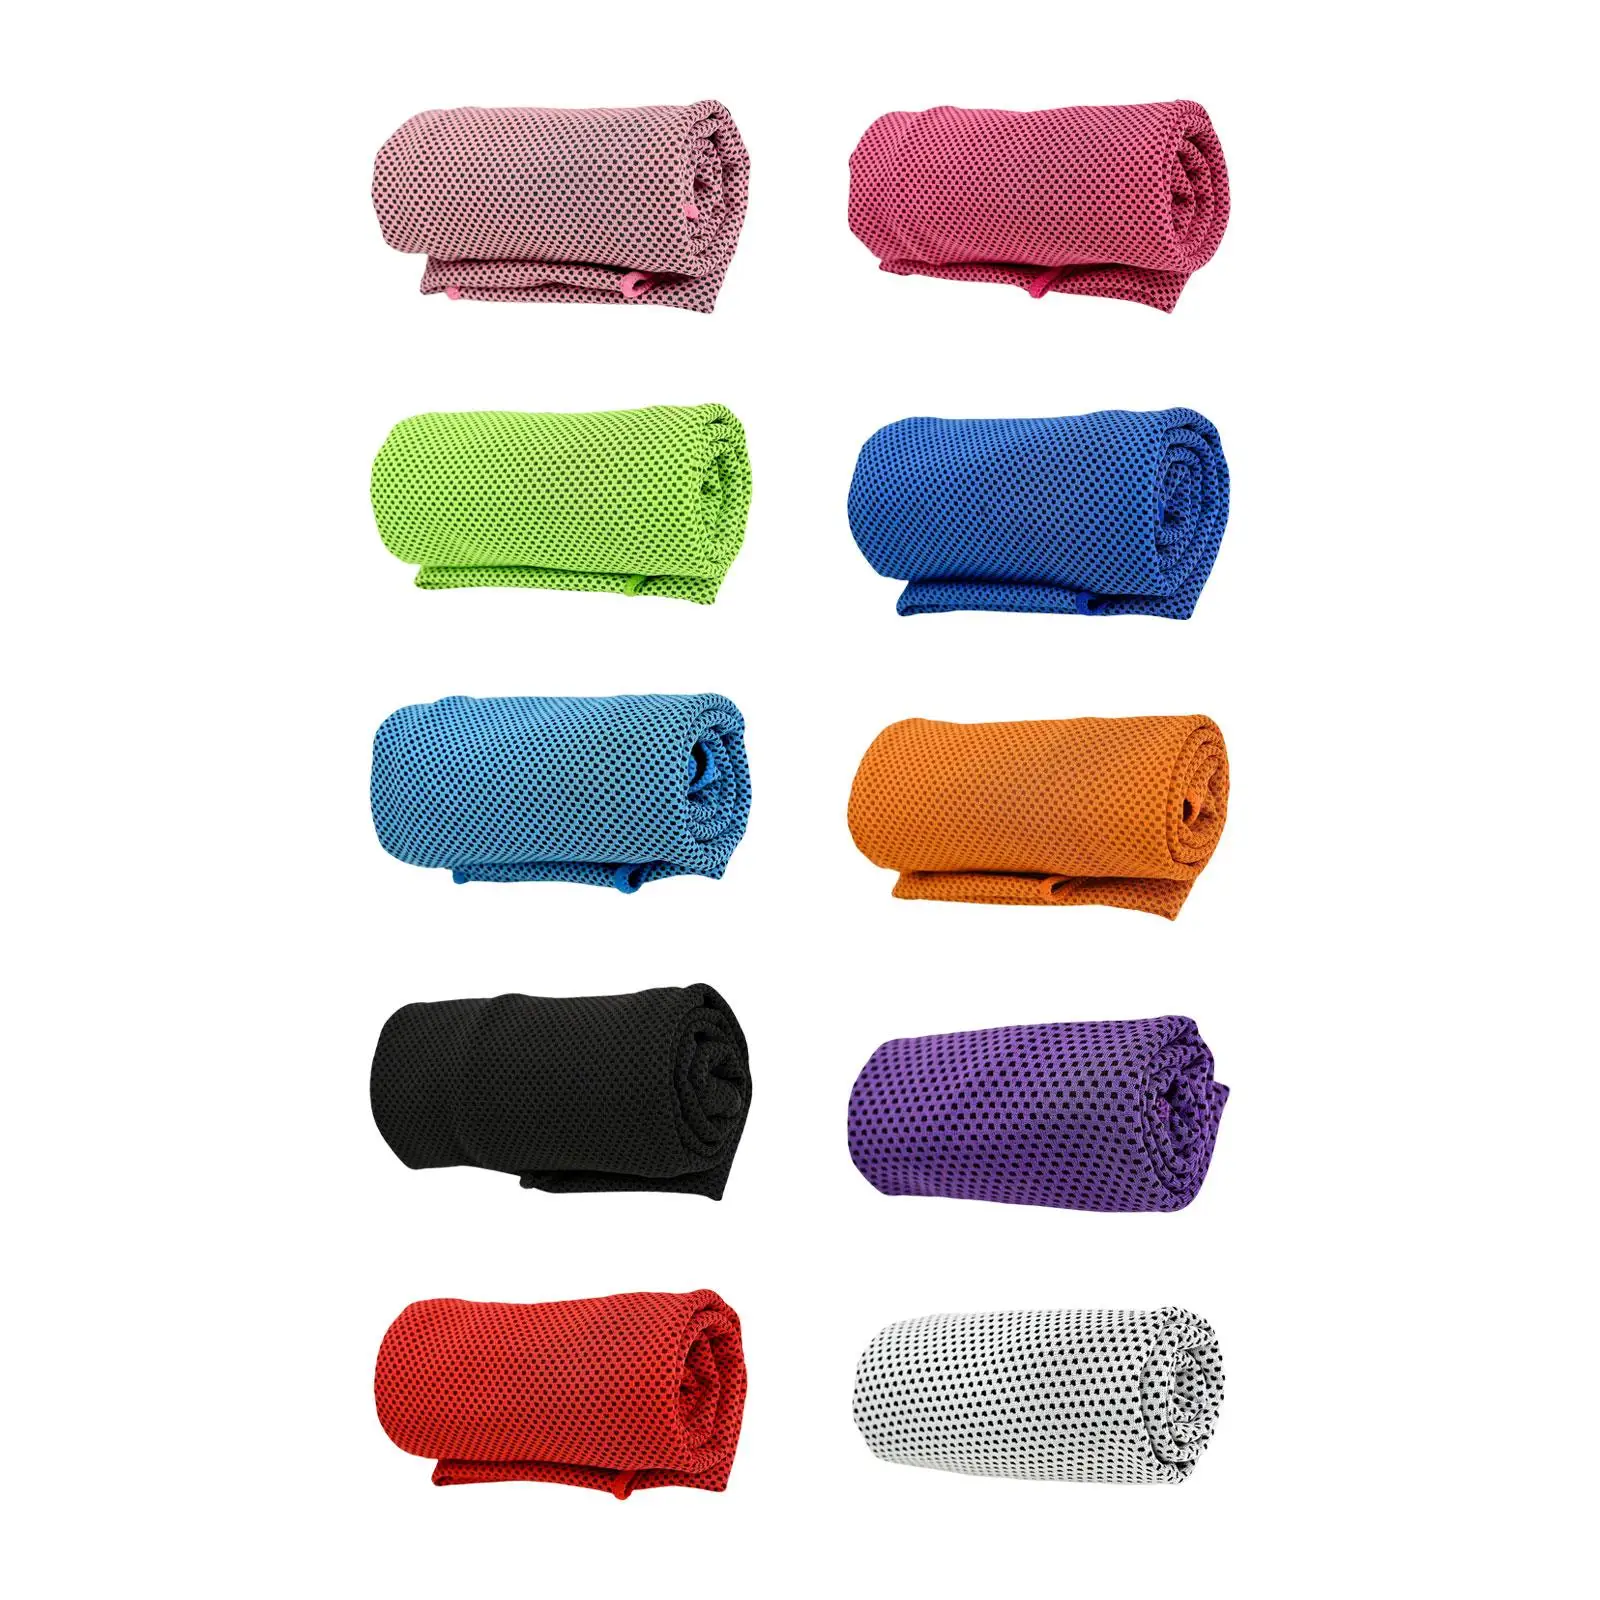 Soft Breathable Chilly Towel Ice Instant Towel Microfiber Cool Towel for Jogging